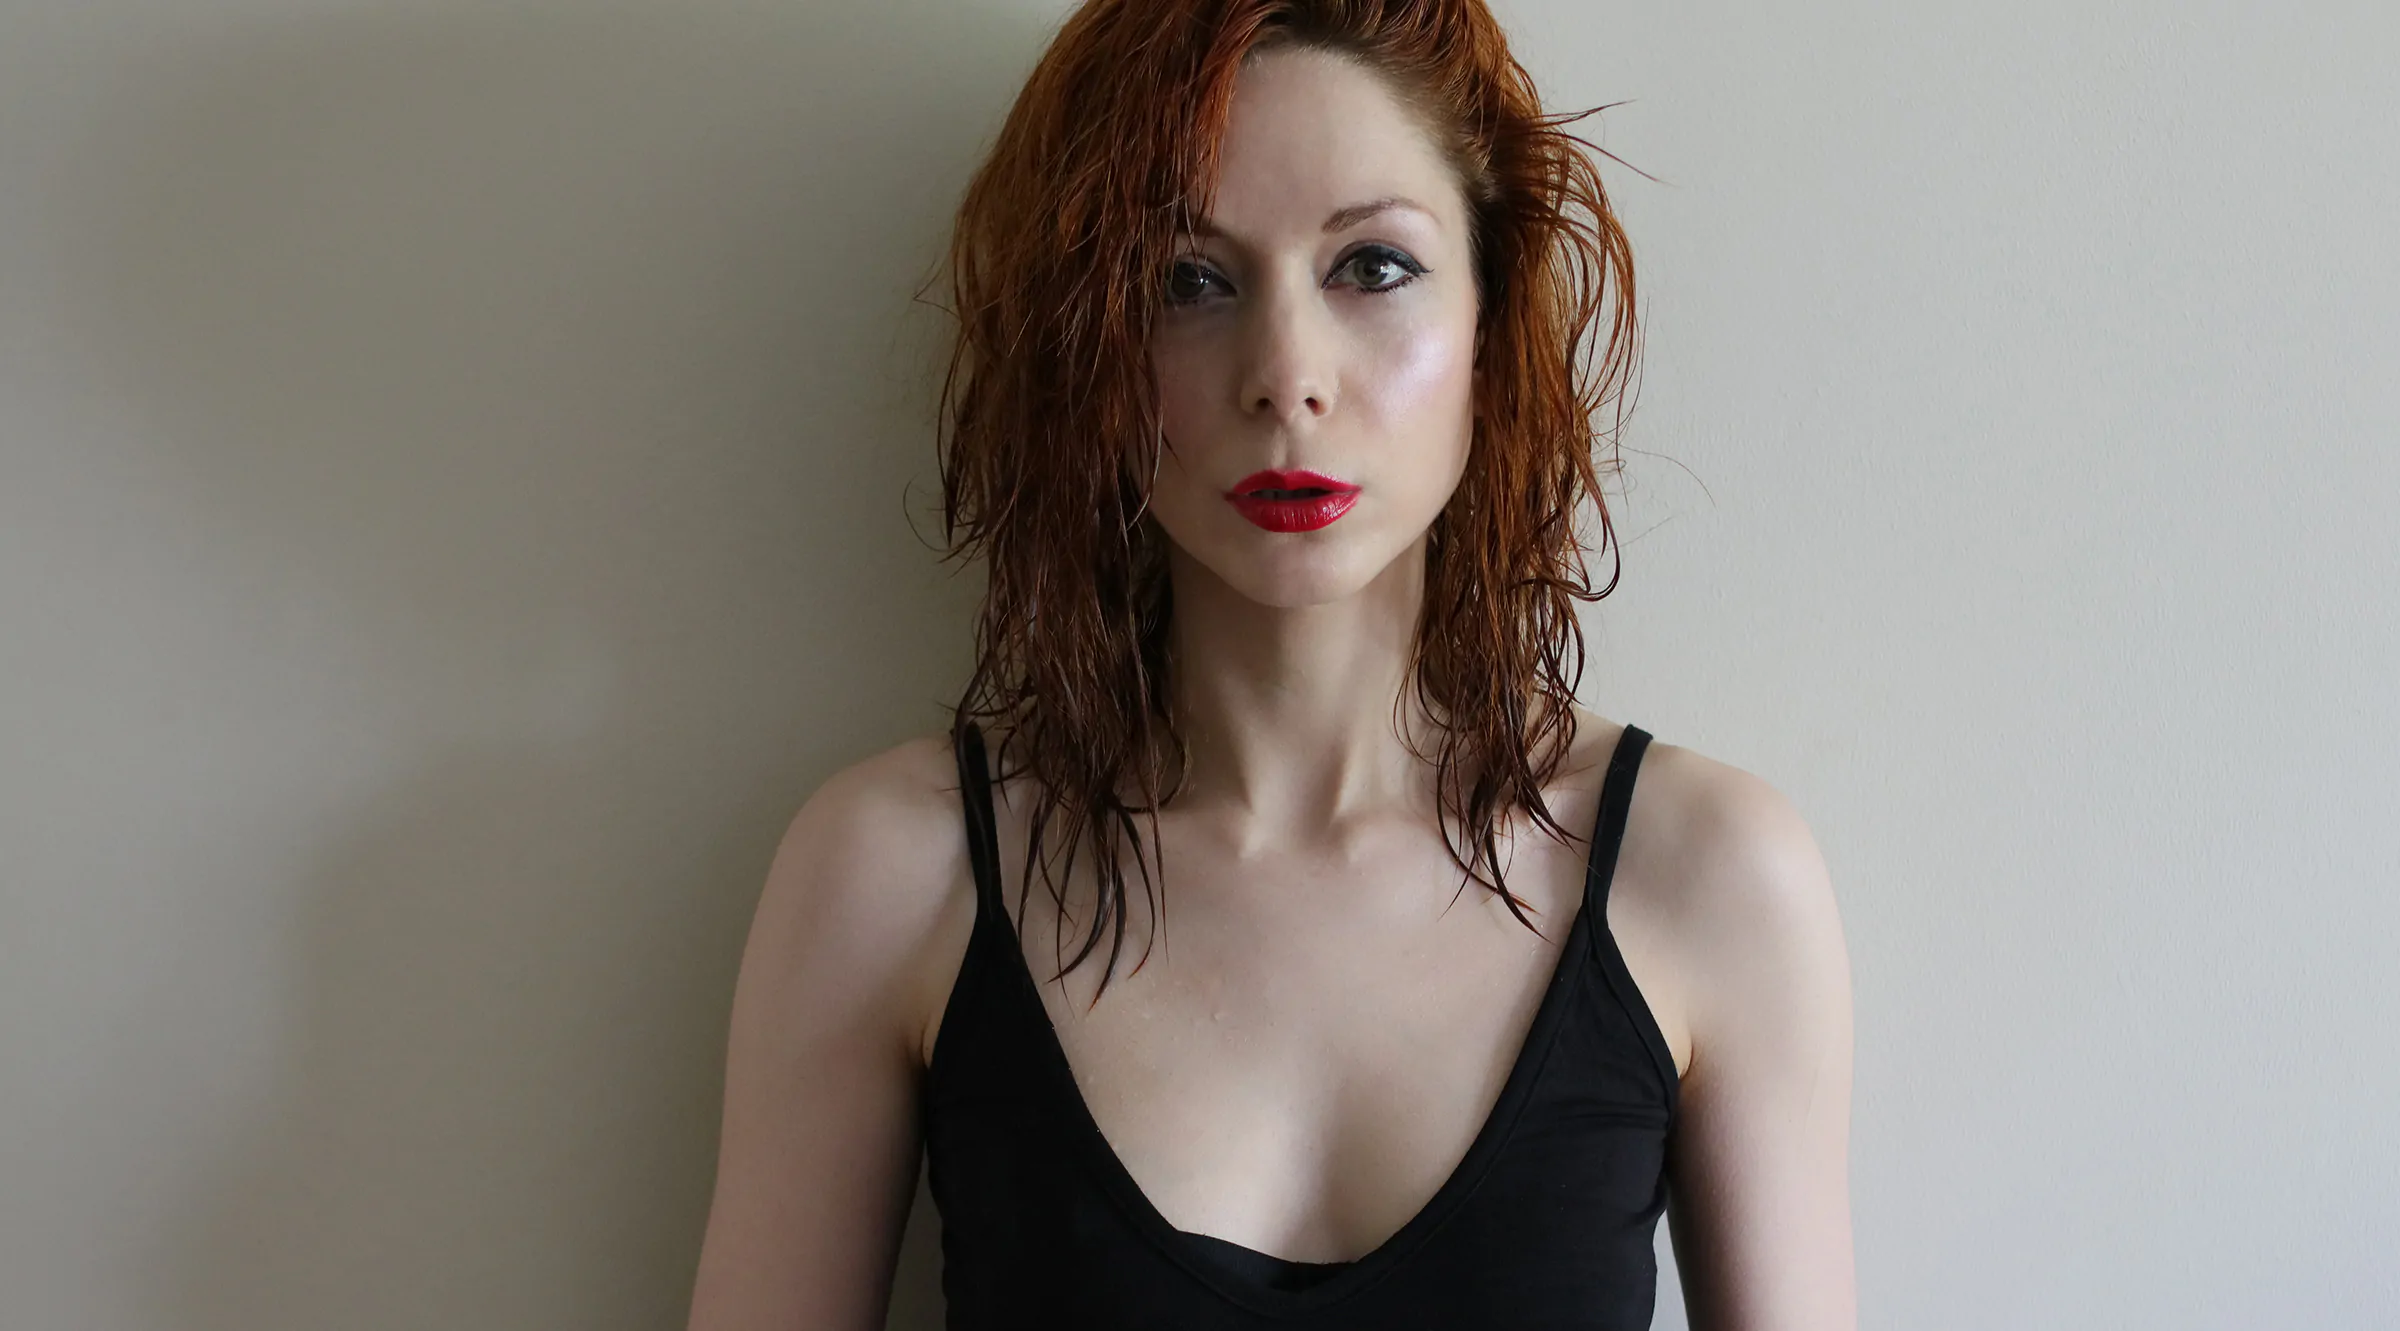 INTERVIEW: The Anchoress on The Art of Losing